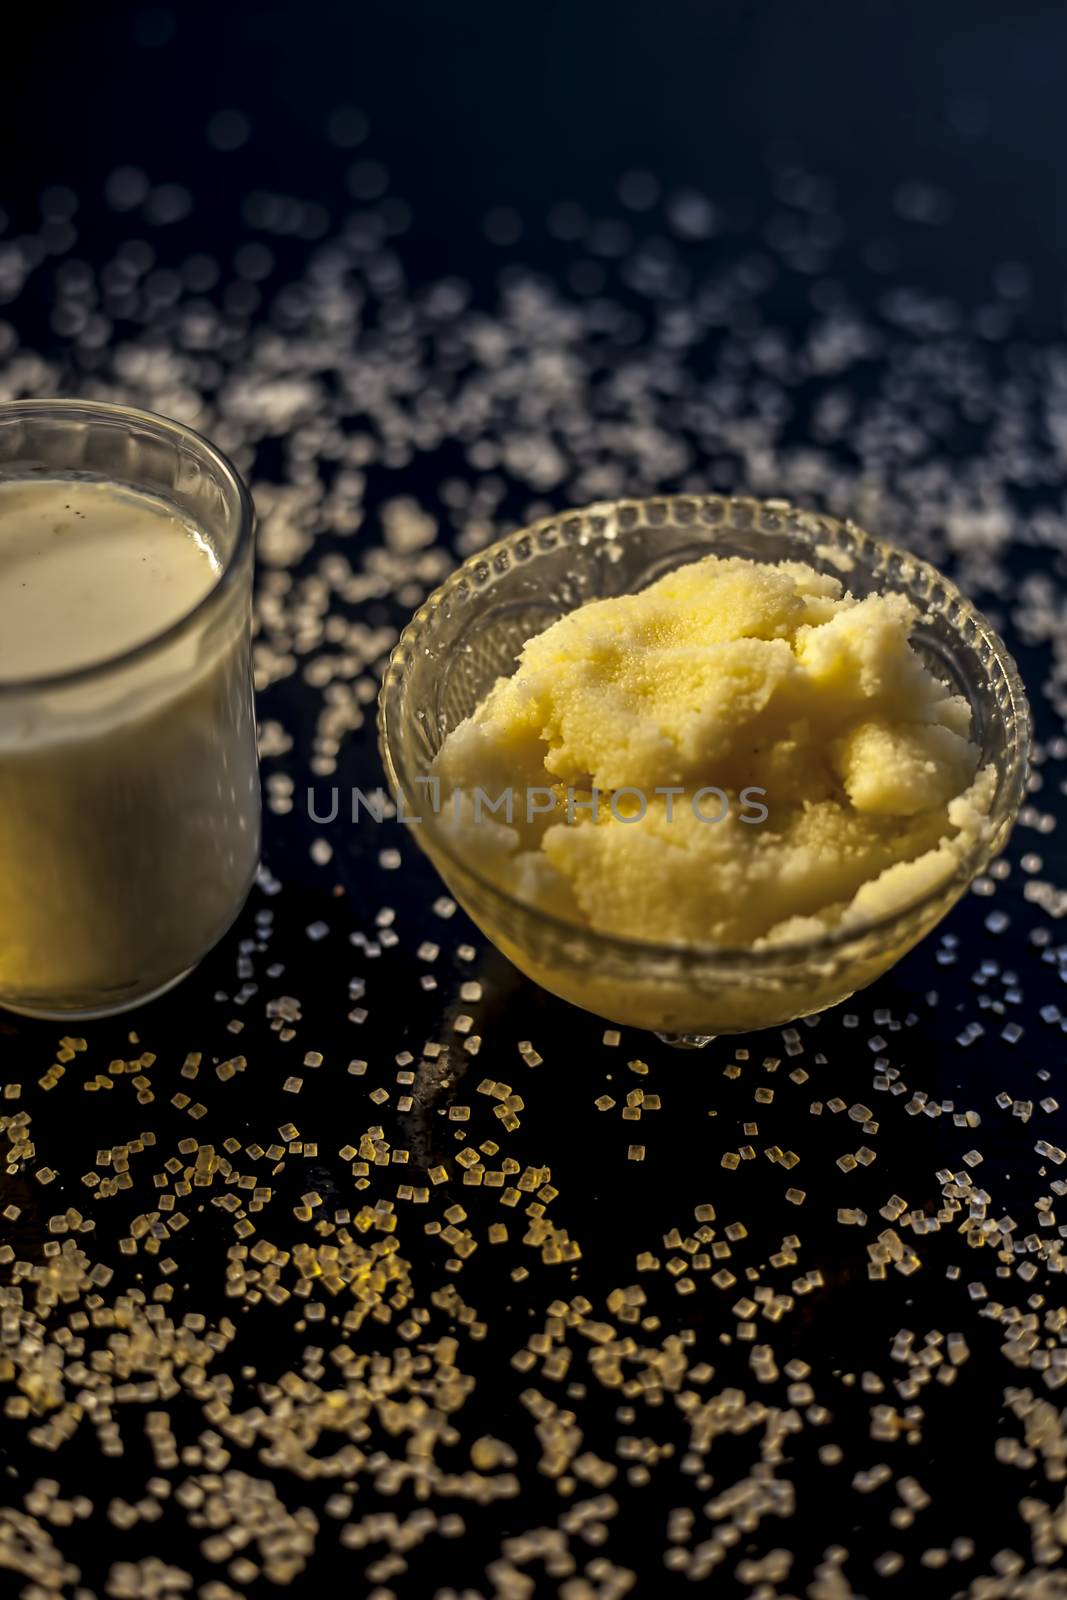 Close up of glass bowl of pure milk well mixed with hot milk in it on black wooden glossy surface along with raw ghee clarified butter and some sugar crystals spread on the surface. Vertical shot. by mirzamlk